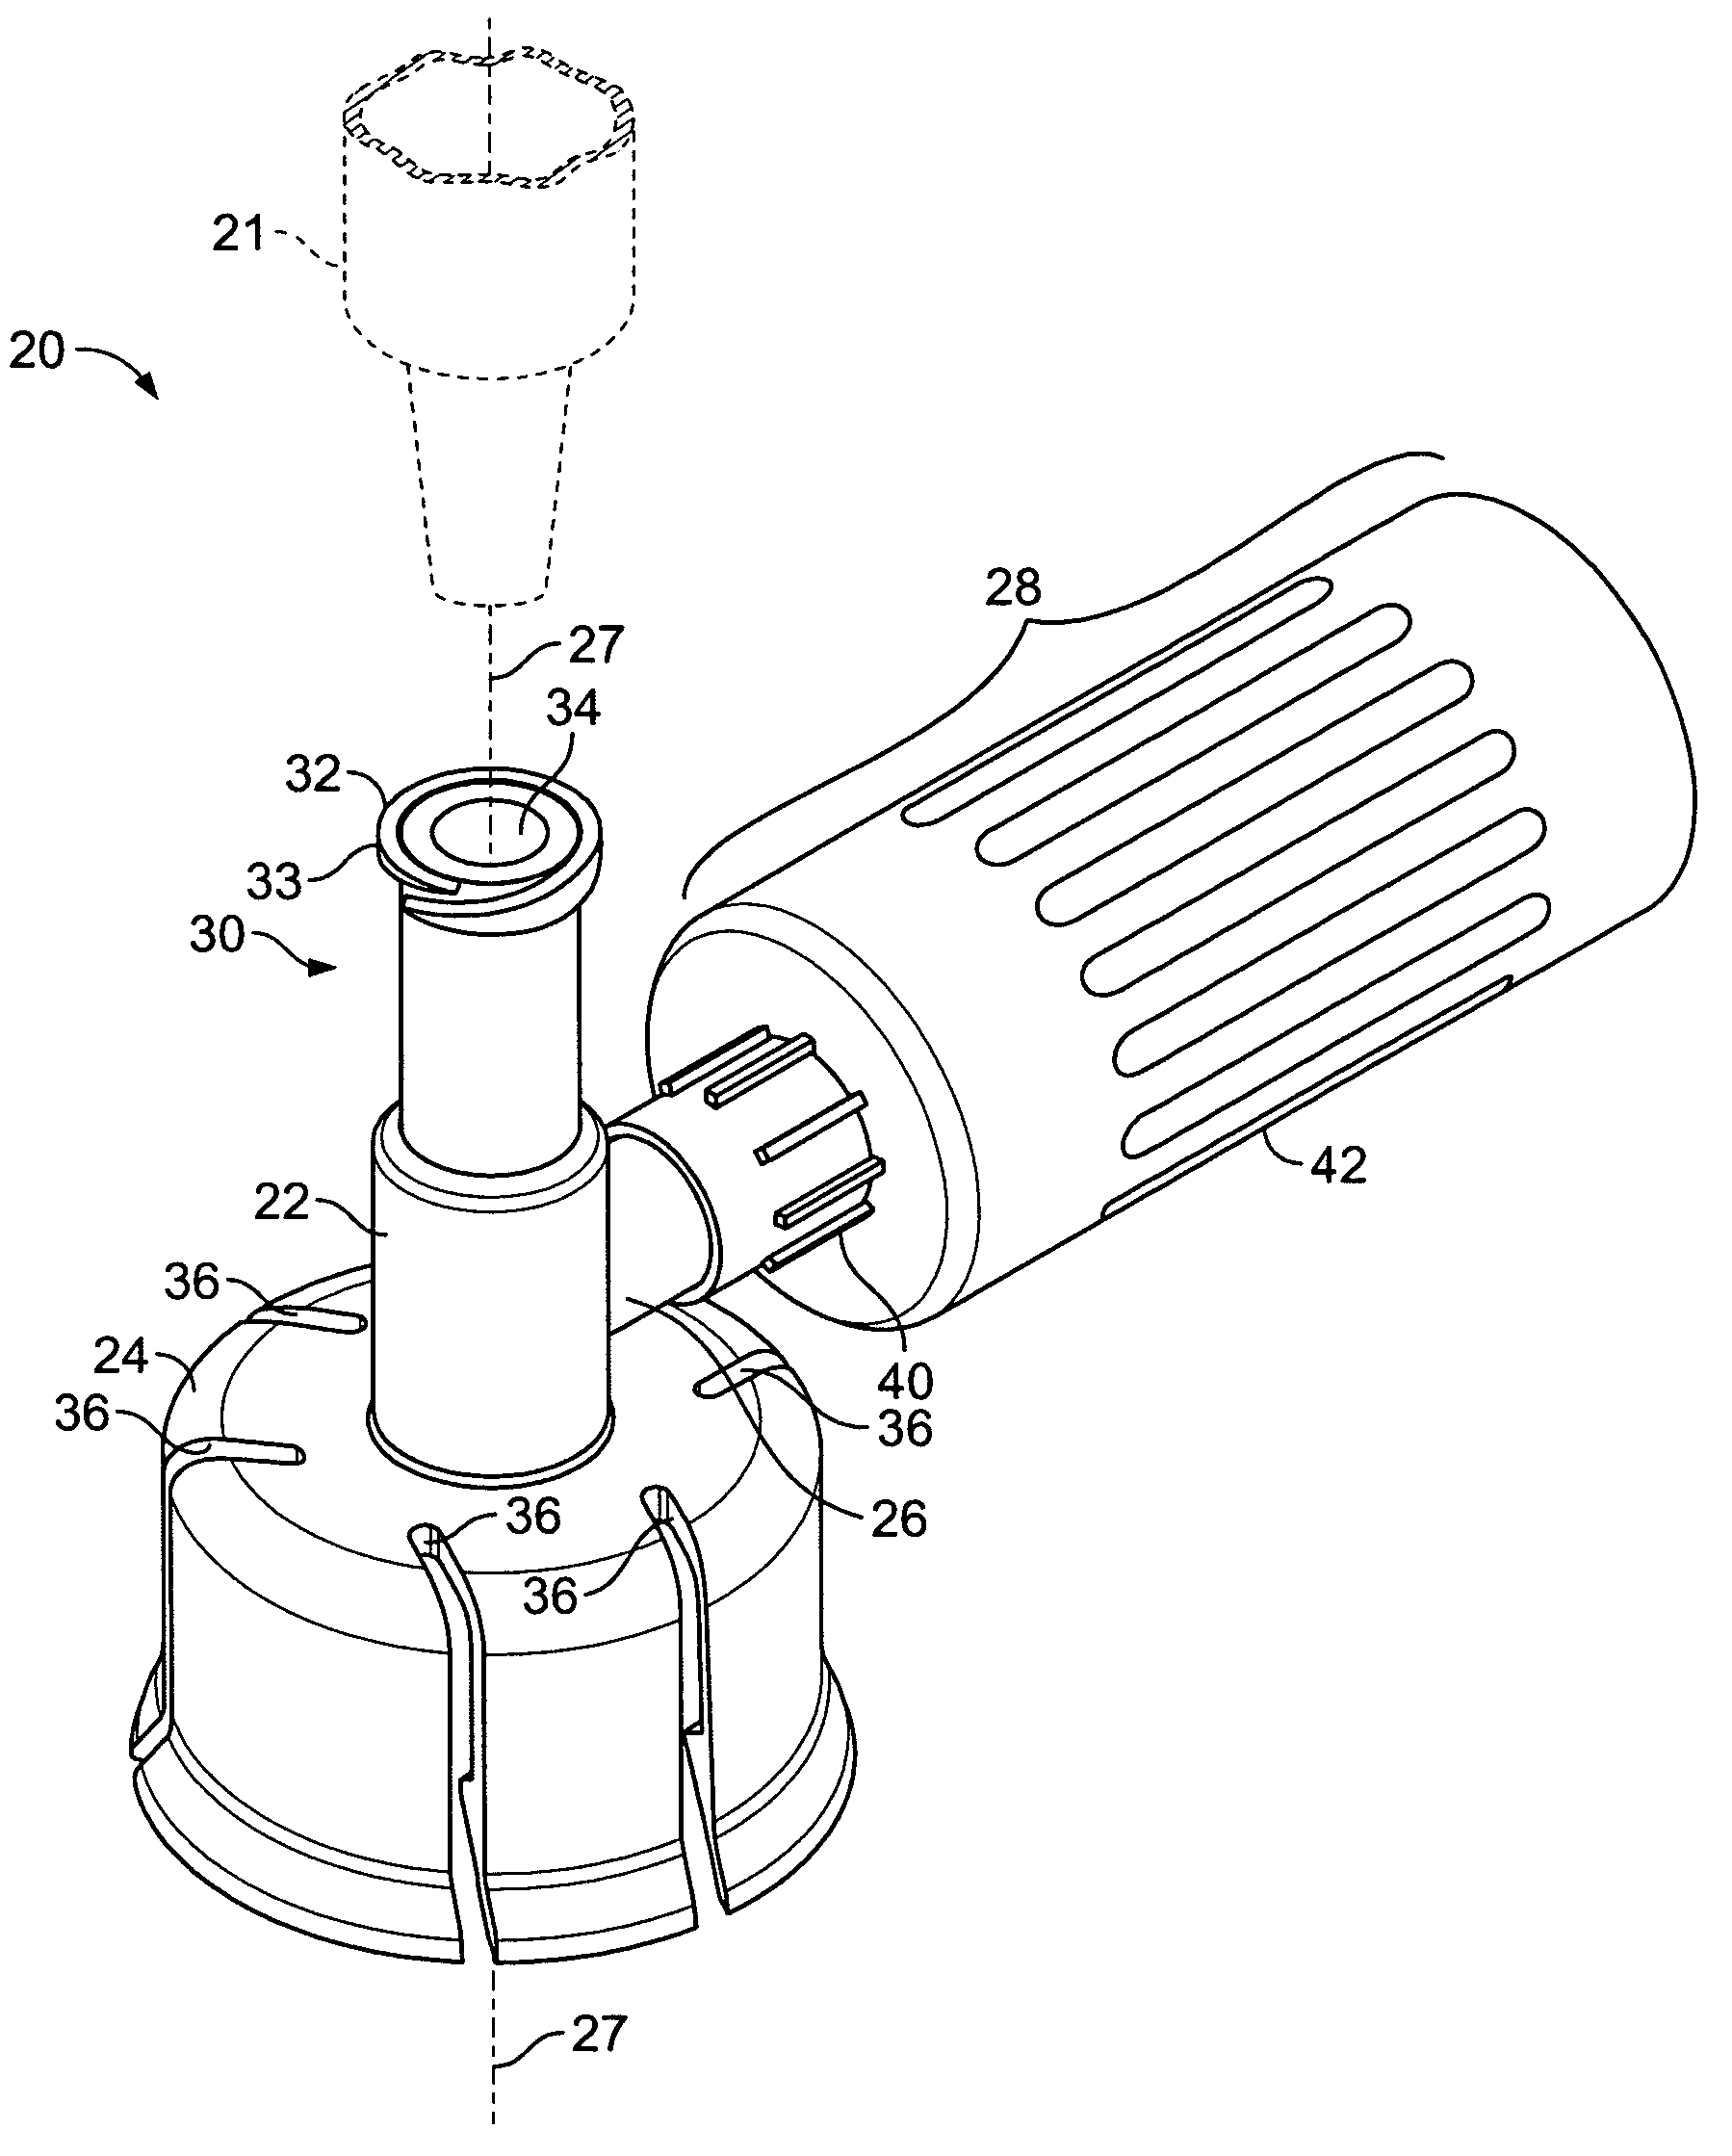 Pressure equalizing device for vial access